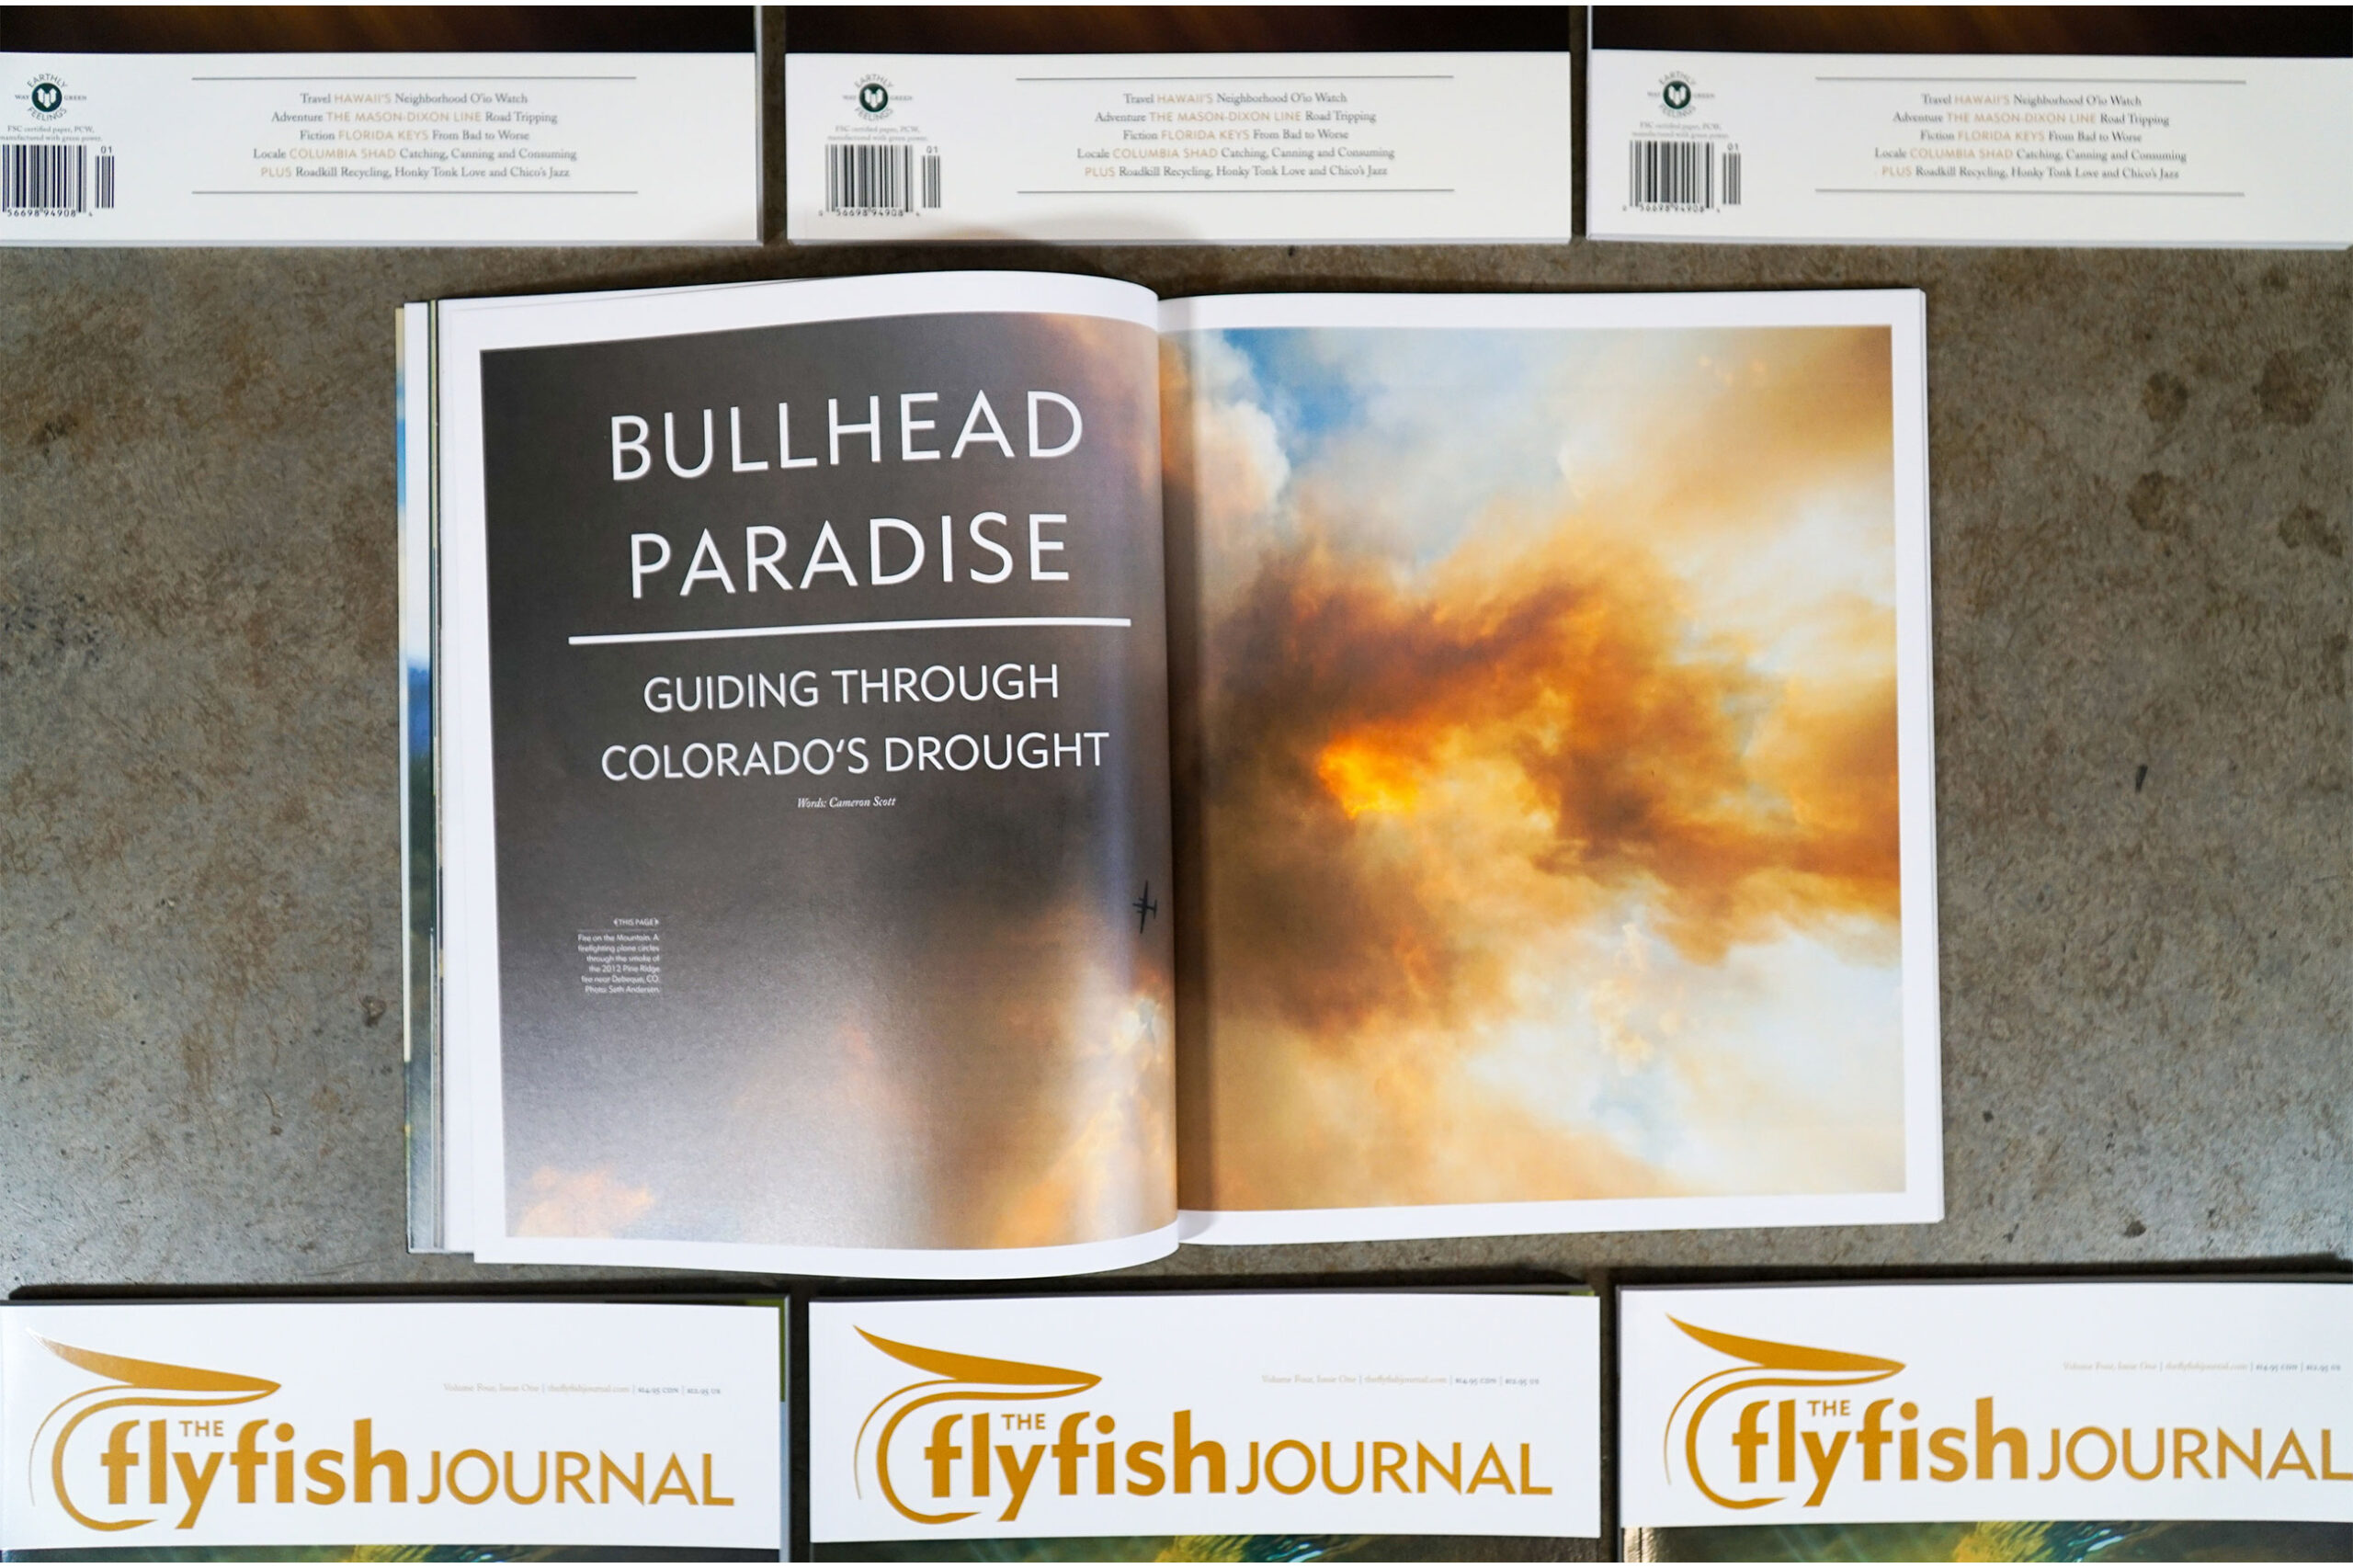 The Flyfish Journal Volume 4 Issue 1 Feature Bullhead Paradise